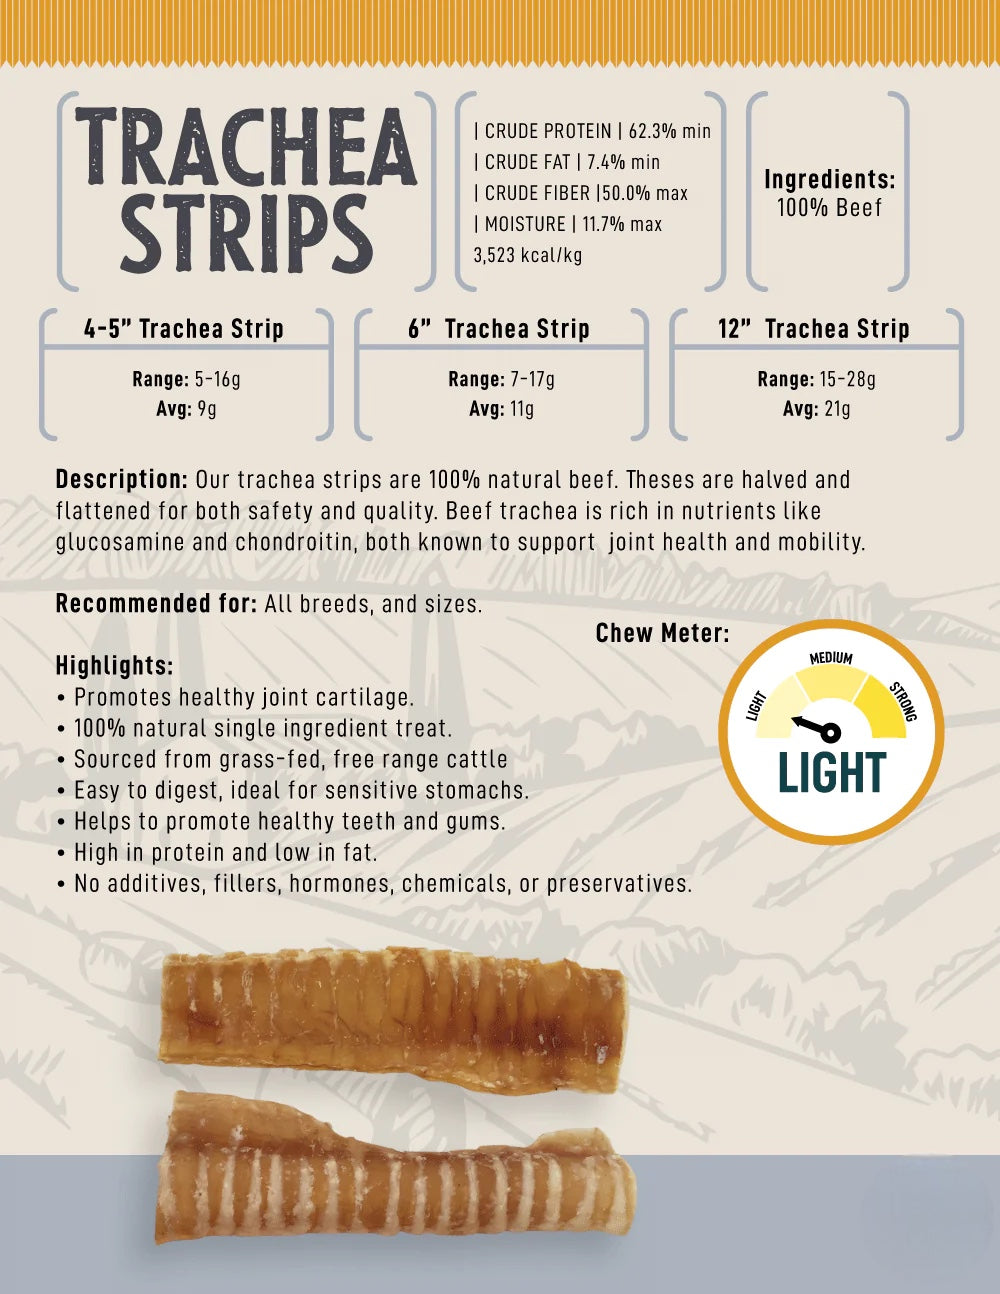 Beef Trachea Chips - 6 Inch